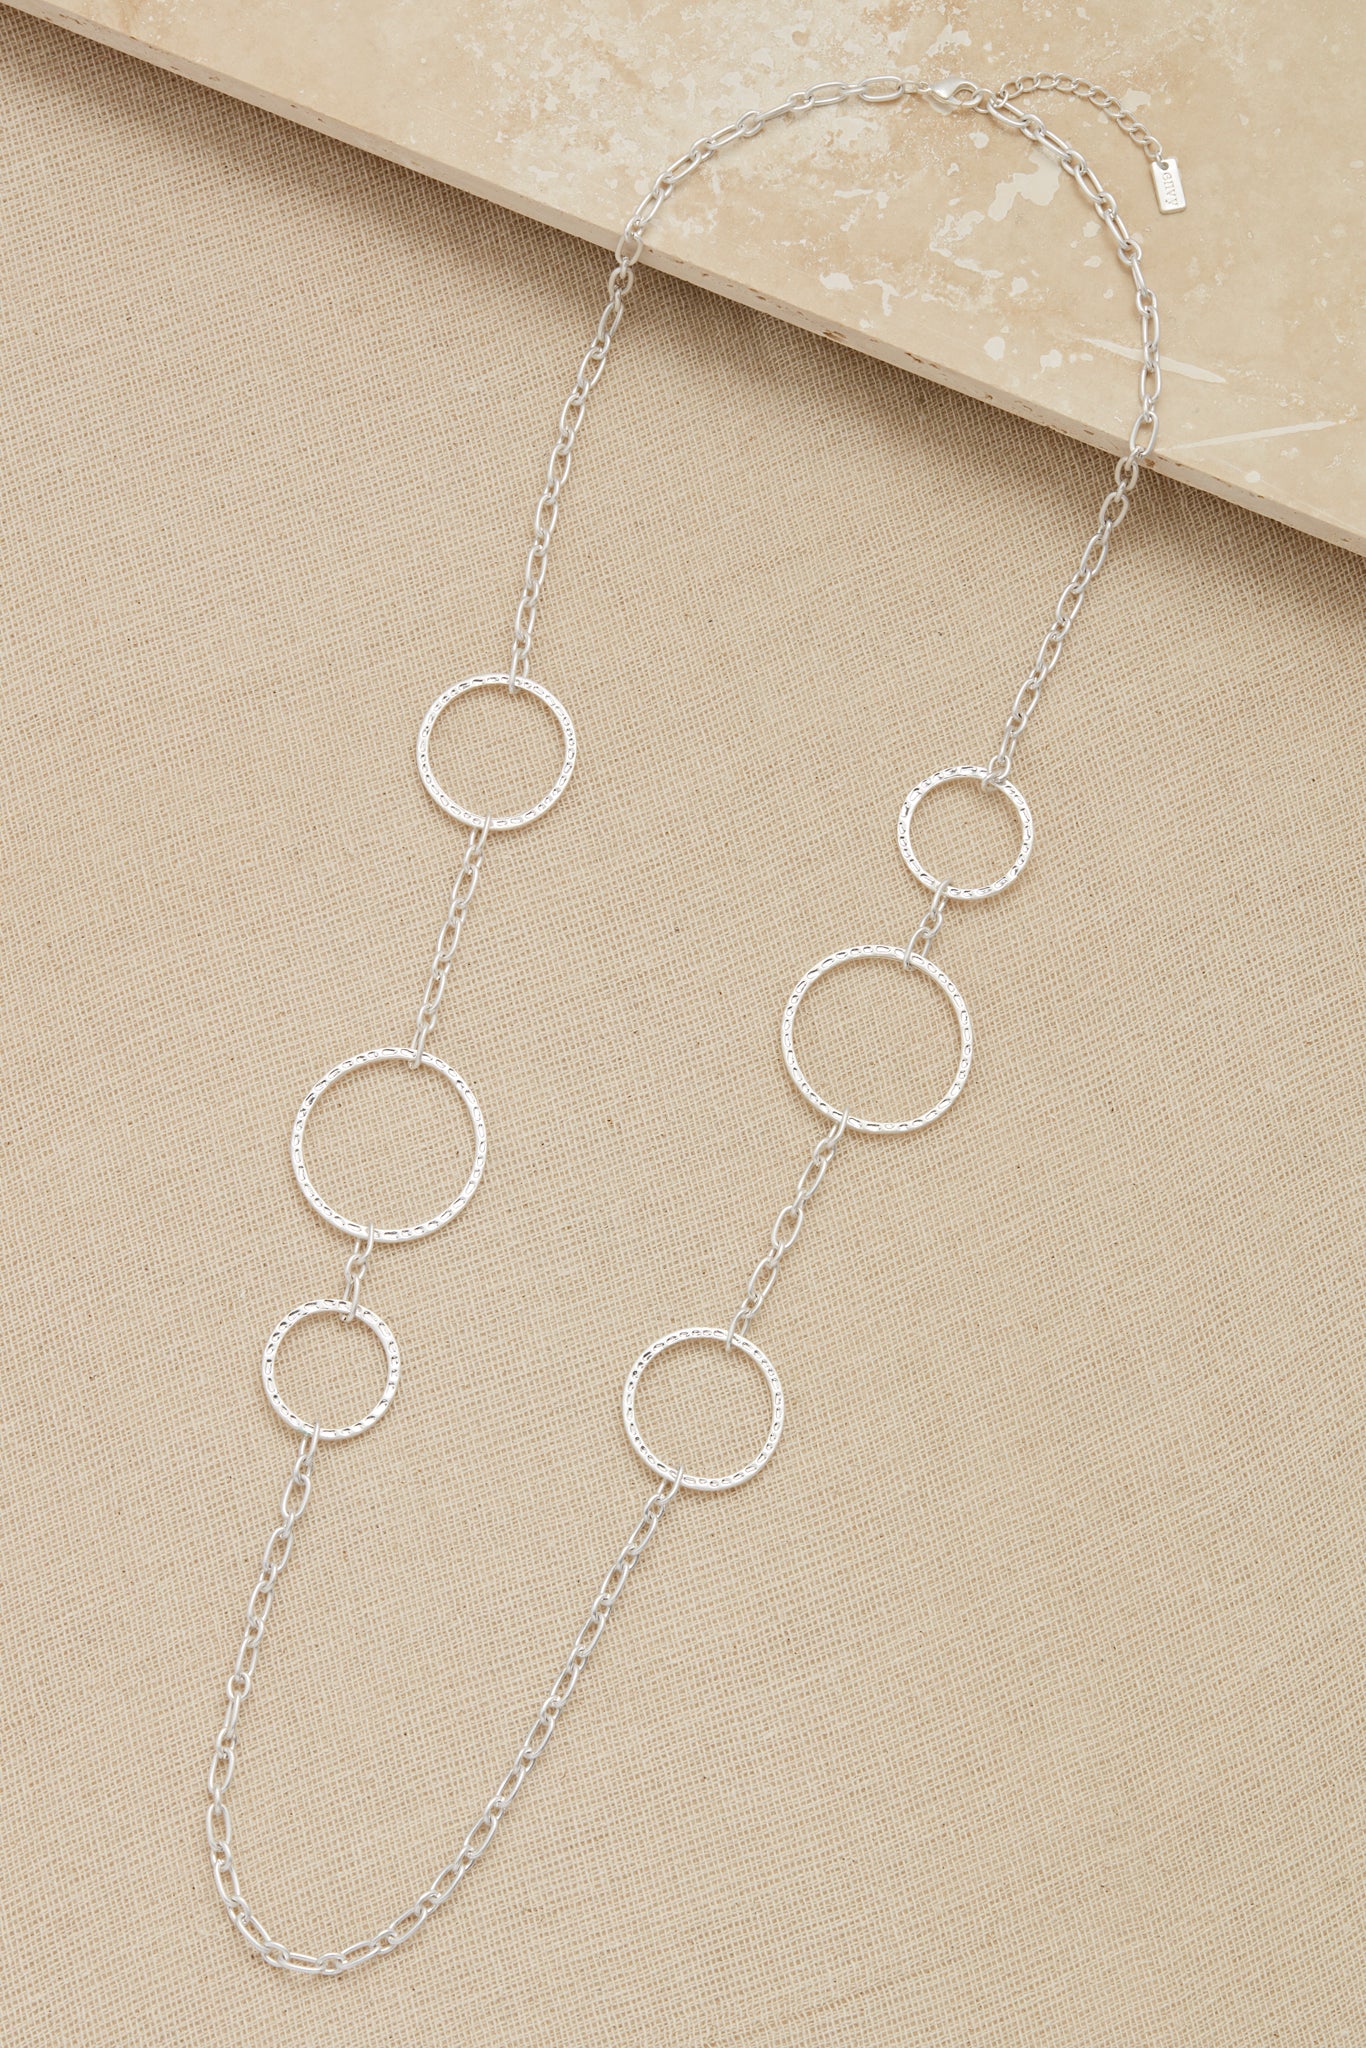 Long Silver Necklace with Textured Loops